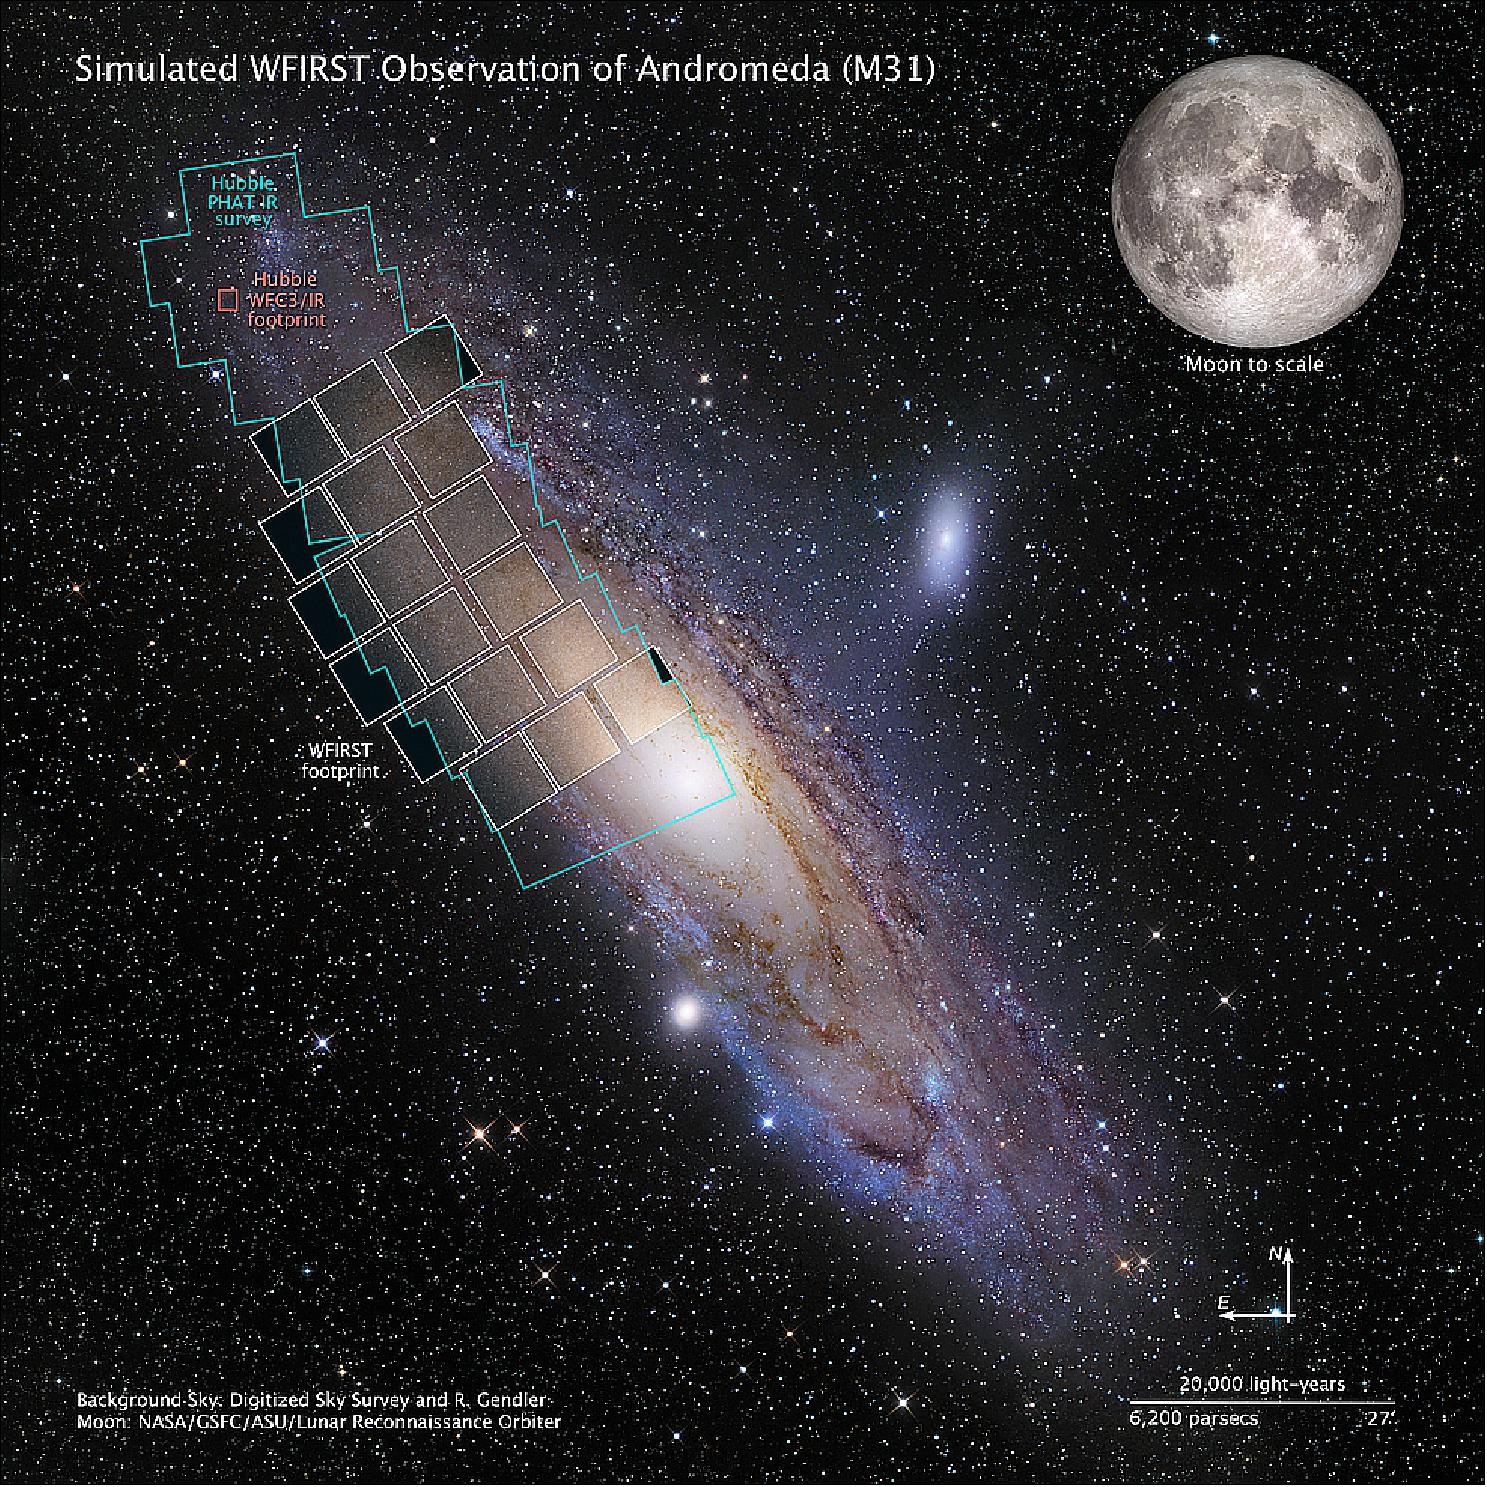 Figure 36: A composite figure of the Andromeda galaxy (M31) highlights the extremely large field of view of NASA’s upcoming Wide Field Infrared Survey Telescope (WFIRST). The background consists of ground-based imagery of the main disk of the Andromeda galaxy from the Digitized Sky Survey (DSS). A photo of the full Moon from NASA’s Lunar Reconnaissance Orbiter is provided for scale: Andromeda has a diameter of about 3 degrees on the sky, while the Moon is about 0.5 degrees across. (In reality, the Moon is much smaller than Andromeda, but it is also a lot closer.) Outlined in teal is the region of Andromeda covered by the Panchromatic Hubble Andromeda Treasury (PHAT) mosaic, the largest Hubble mosaic ever created. Overlaid on the PHAT region and outlined in white is the footprint of the 18 square detectors that make up WFIRST’s Wide Field Instrument (WFI). The entire footprint covers about 1.33 times the area of the full Moon and represents the area captured in a single shot by WFIRST (0.28 square degrees of the sky). The PHAT, which covers a 61,000-light-year swath of Andromeda, consists of more than 400 composite images collected over more than 650 hours of infrared observing time between 2010 and 2013. WFIRST could cover the entire PHAT, at the same resolution, with just two pointings in less than half an hour [image credit: Background image: Digitized Sky Survey and R. Gendler, Moon image: NASA, GSFC, and Arizona State University, WFIRST simulation: NASA, STScI, and B. F. Williams (University of Washington)]